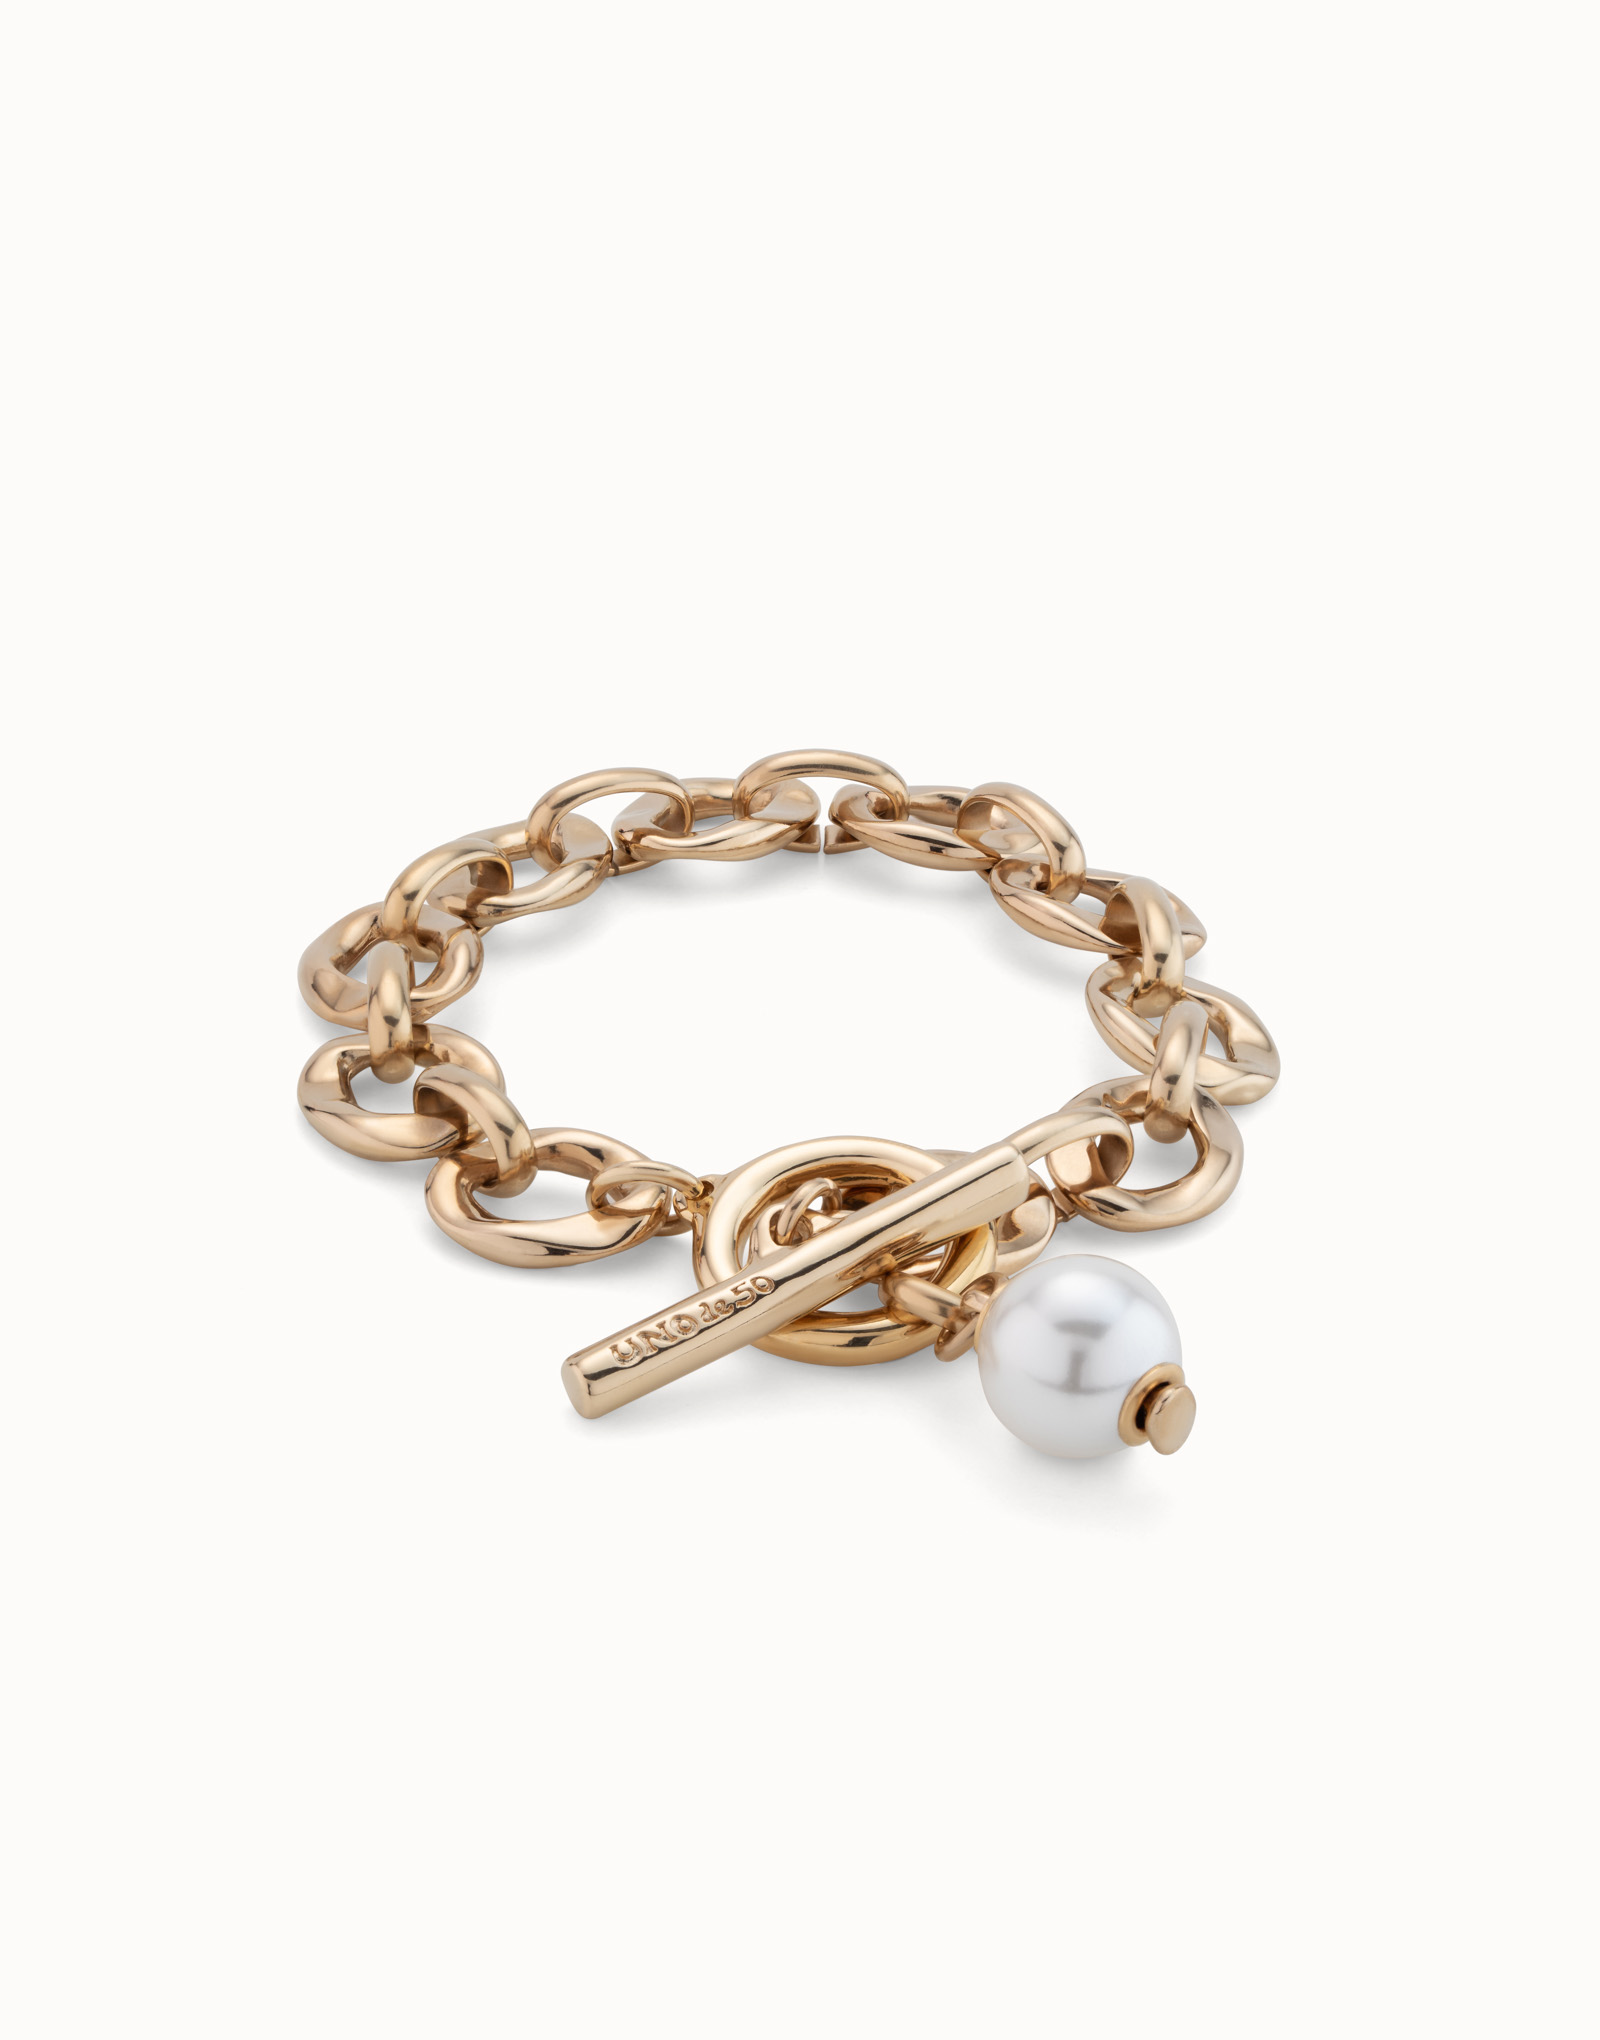 18K gold-plated bracelet with links and pearl charm, Golden, large image number null